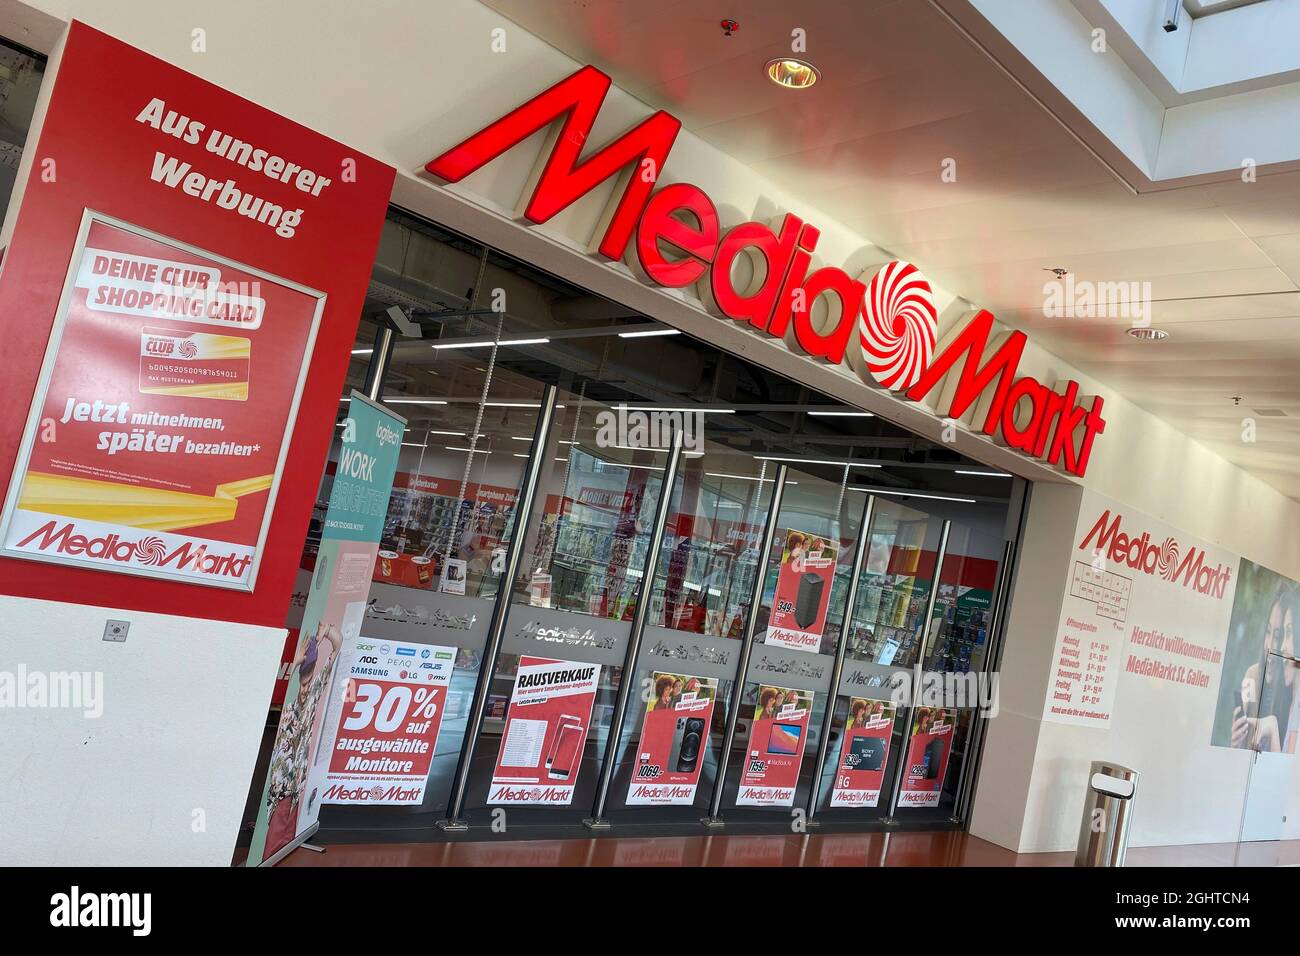 Media-Saturn is the operator of a German electronics retail chain, which is  also the largest in Europe. The company brings together the formerly  independent electrical retail chains Media Markt and Saturn. The